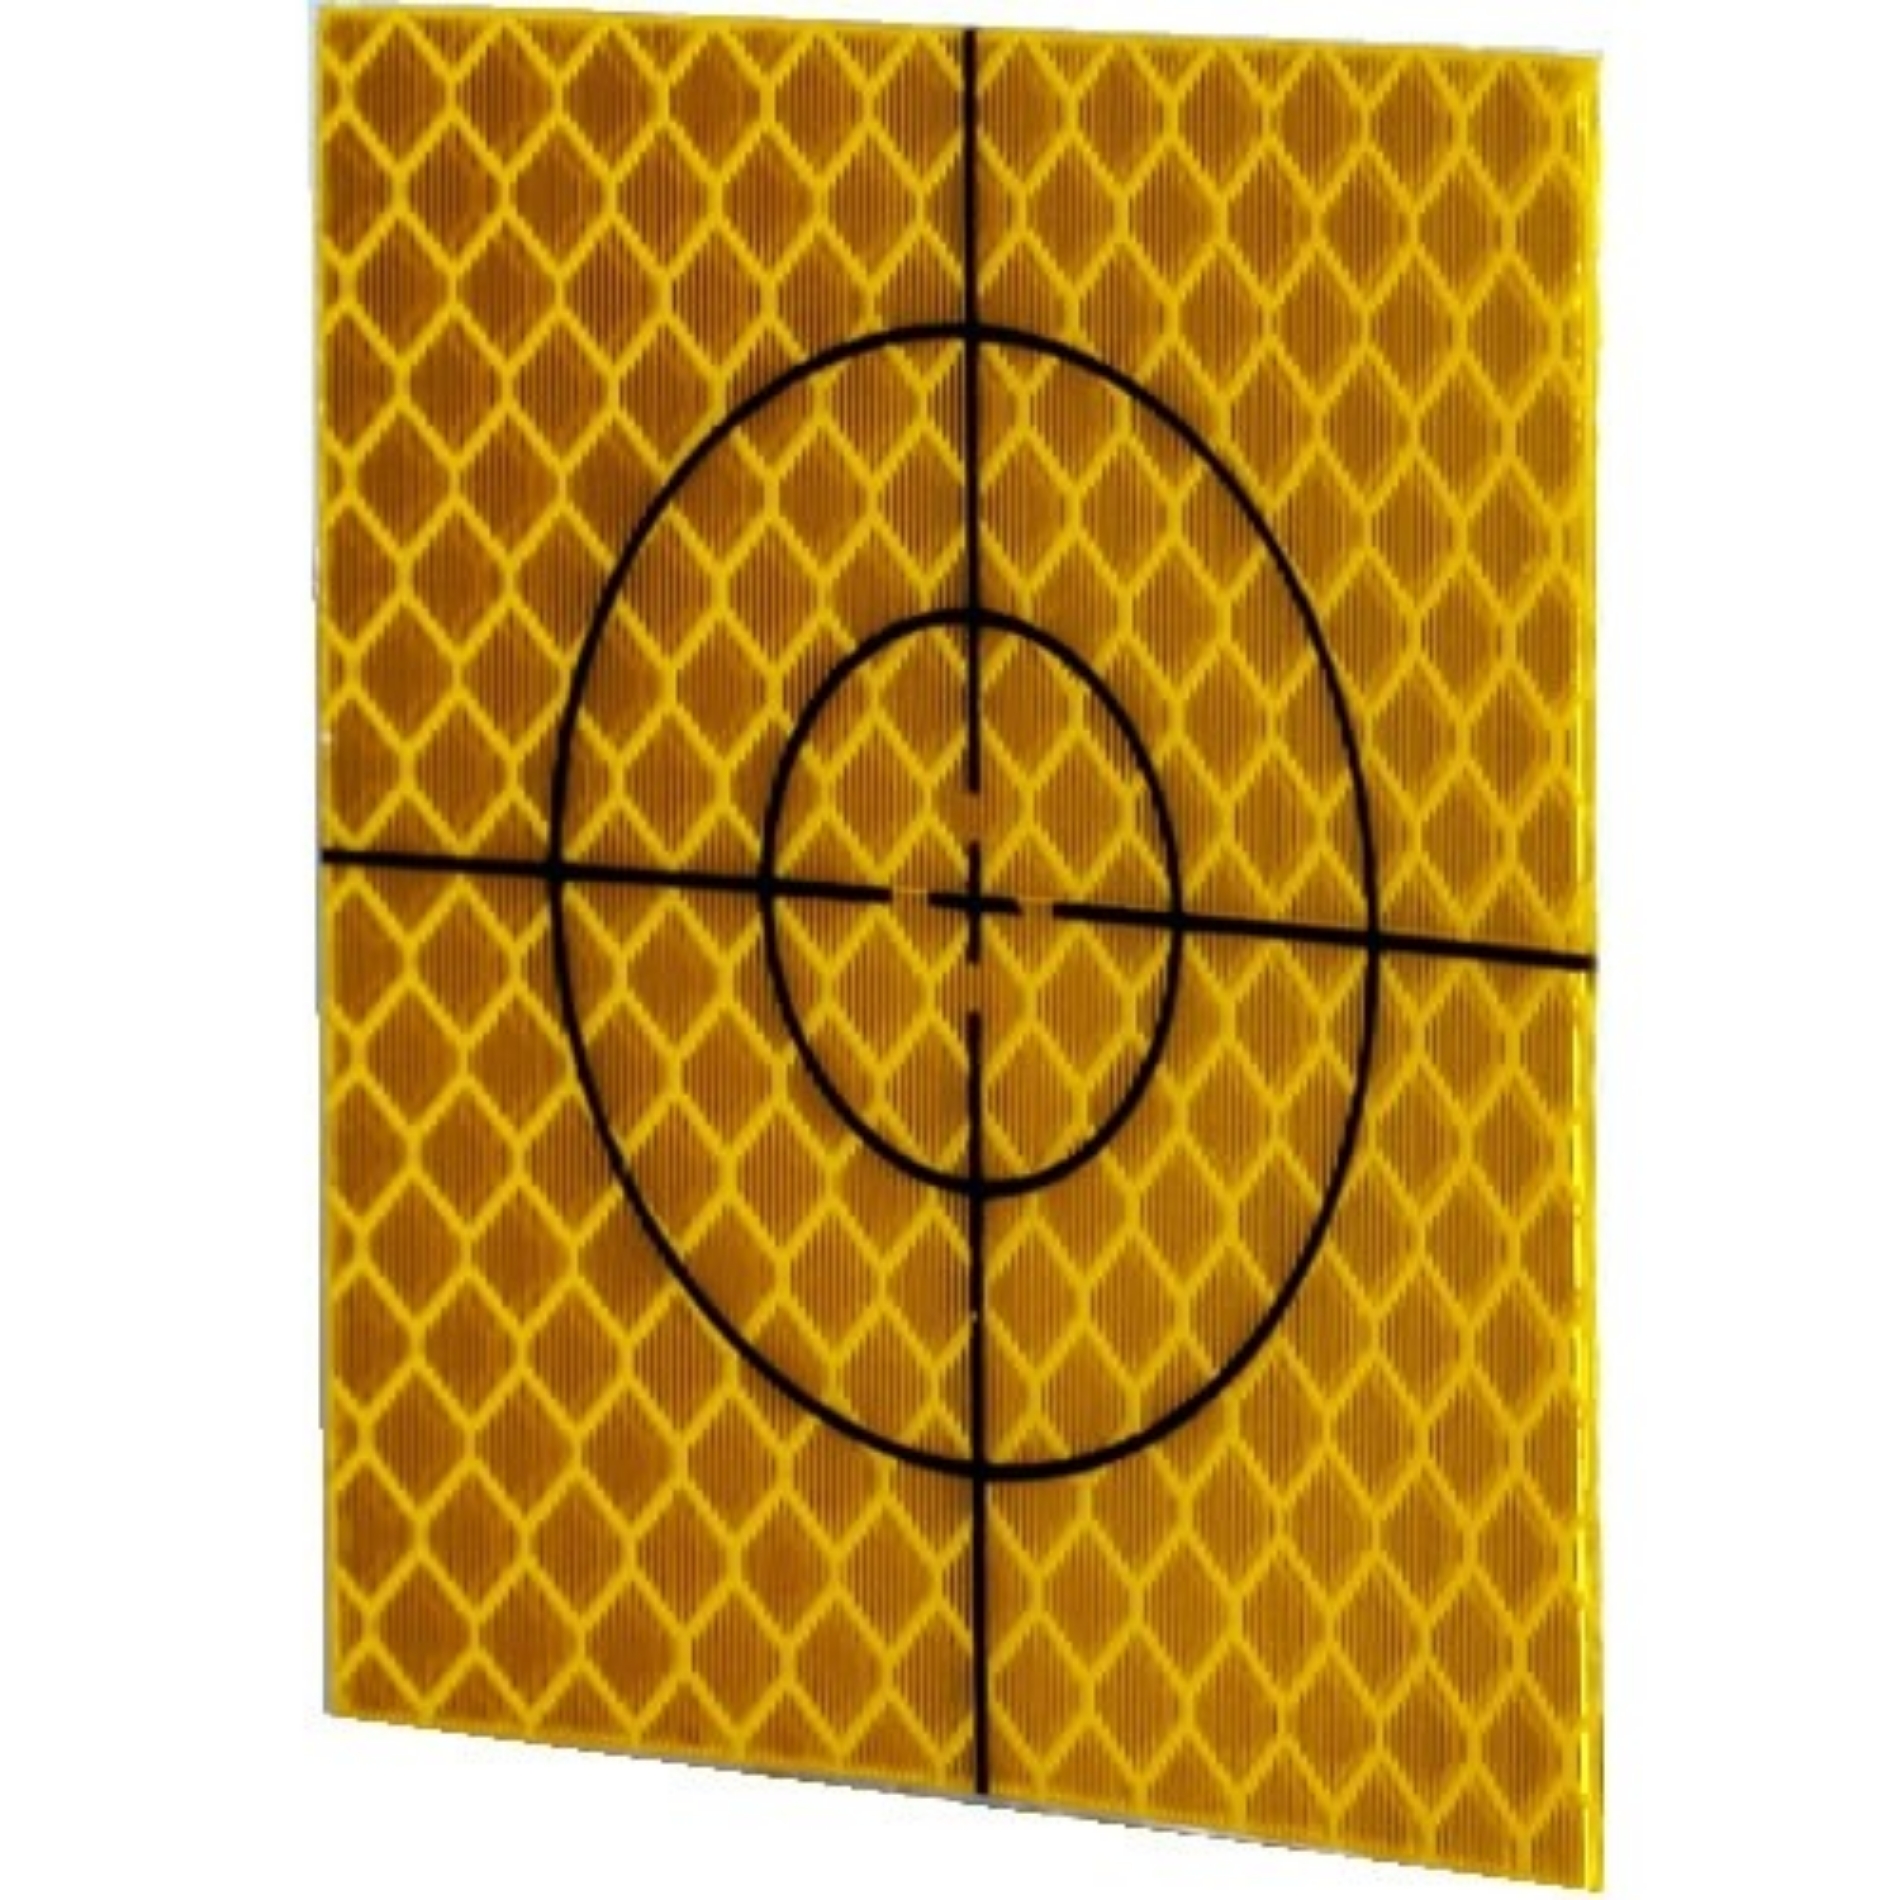 100 No Yellow Reflective Targets / Labels - 40mm x 40mm case free!!! 